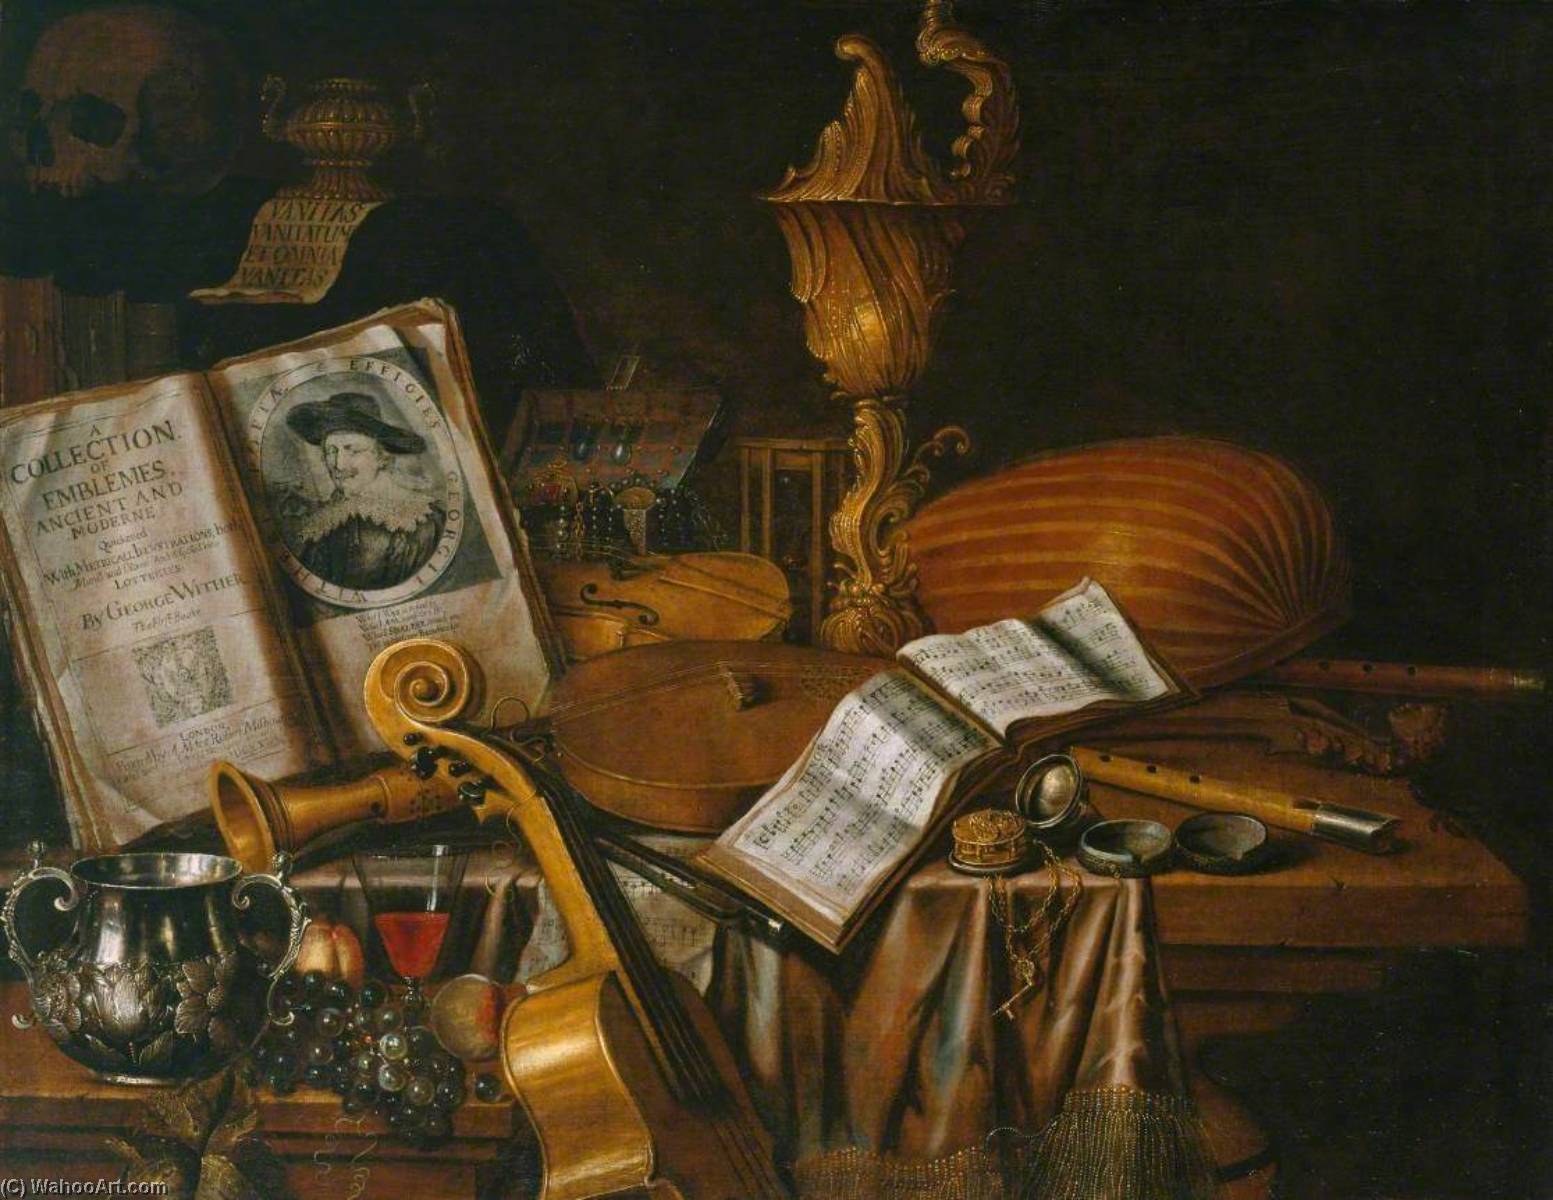 Wikioo.org - สารานุกรมวิจิตรศิลป์ - จิตรกรรม Edwaert Collier - Still Life with a Volume of Wither's 'Emblemes'